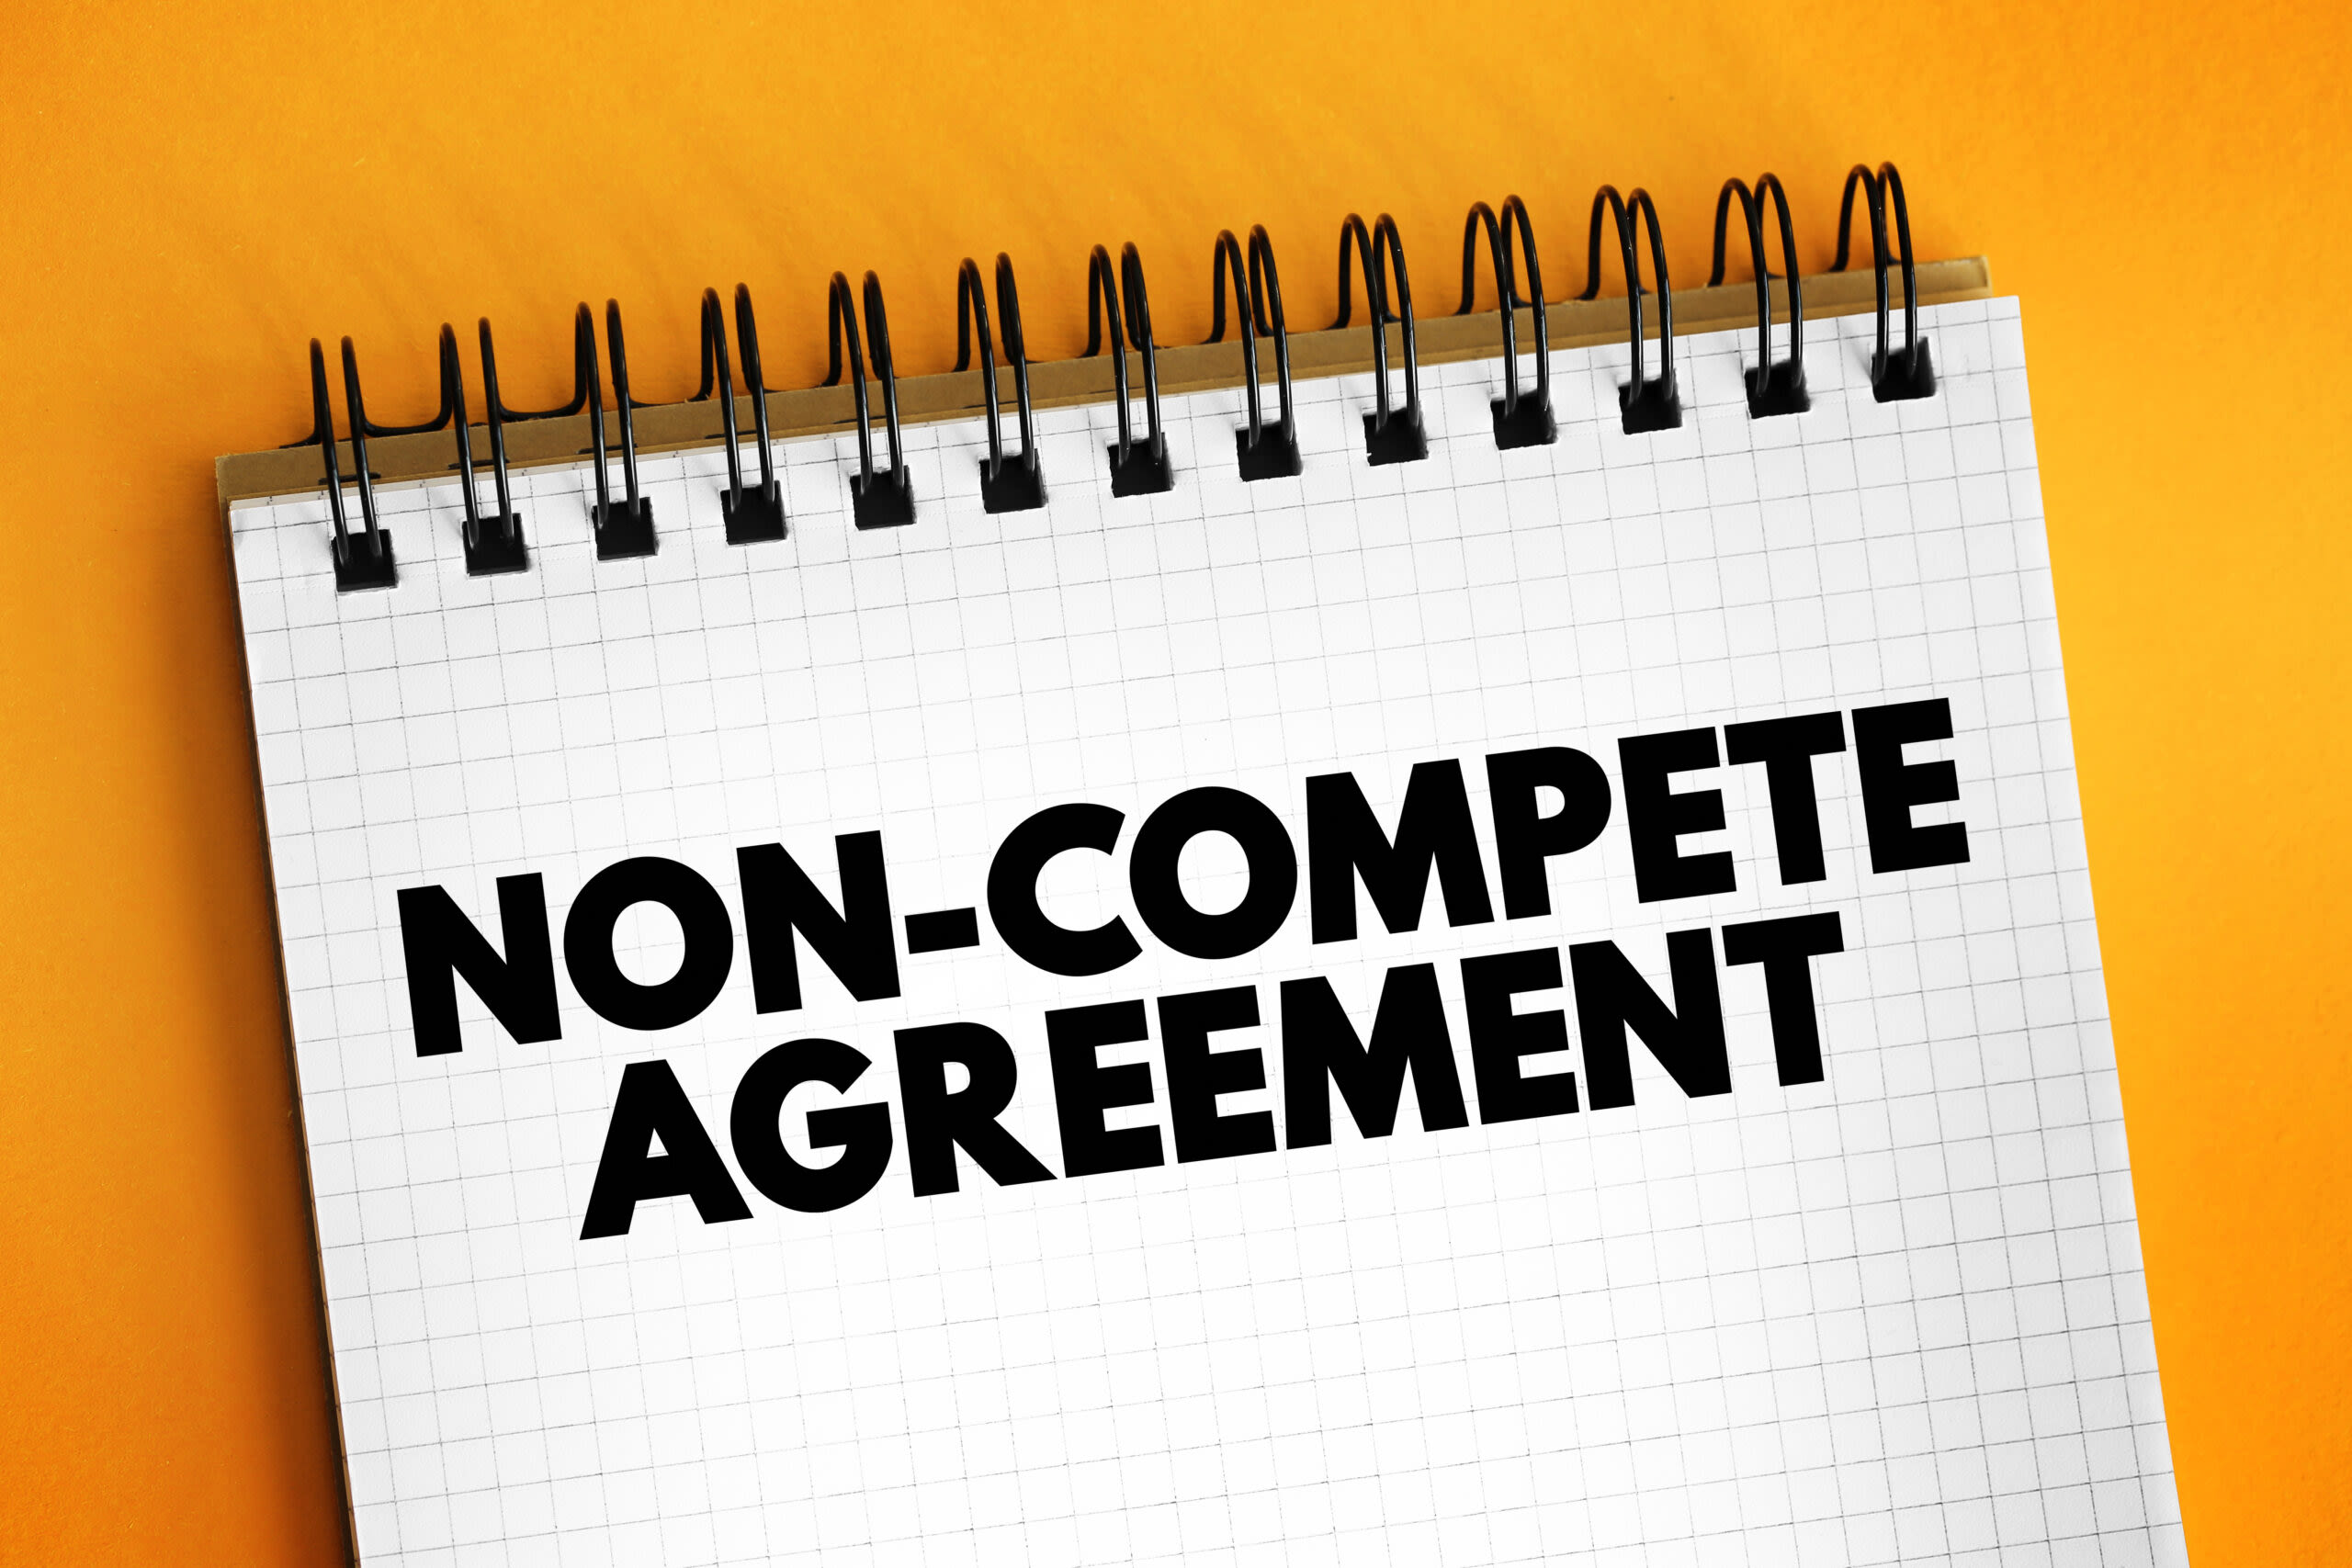 FTC Noncompete Agreement Ban May Not Survive Courts but Some States Could Adopt